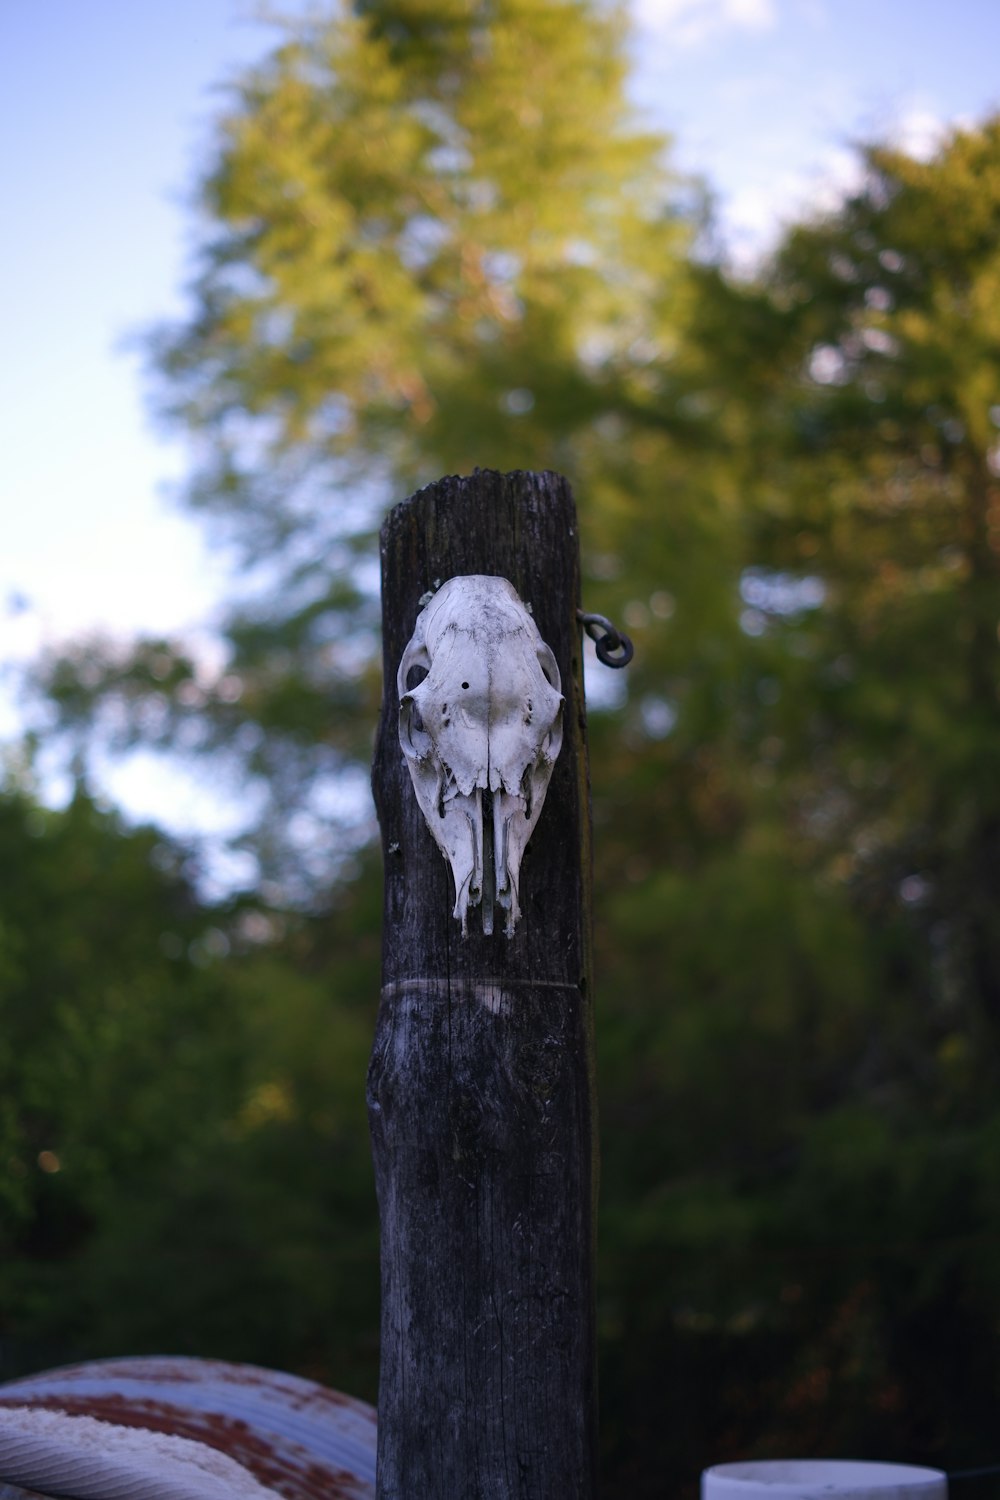 a sticker of a cow skull on a telephone pole